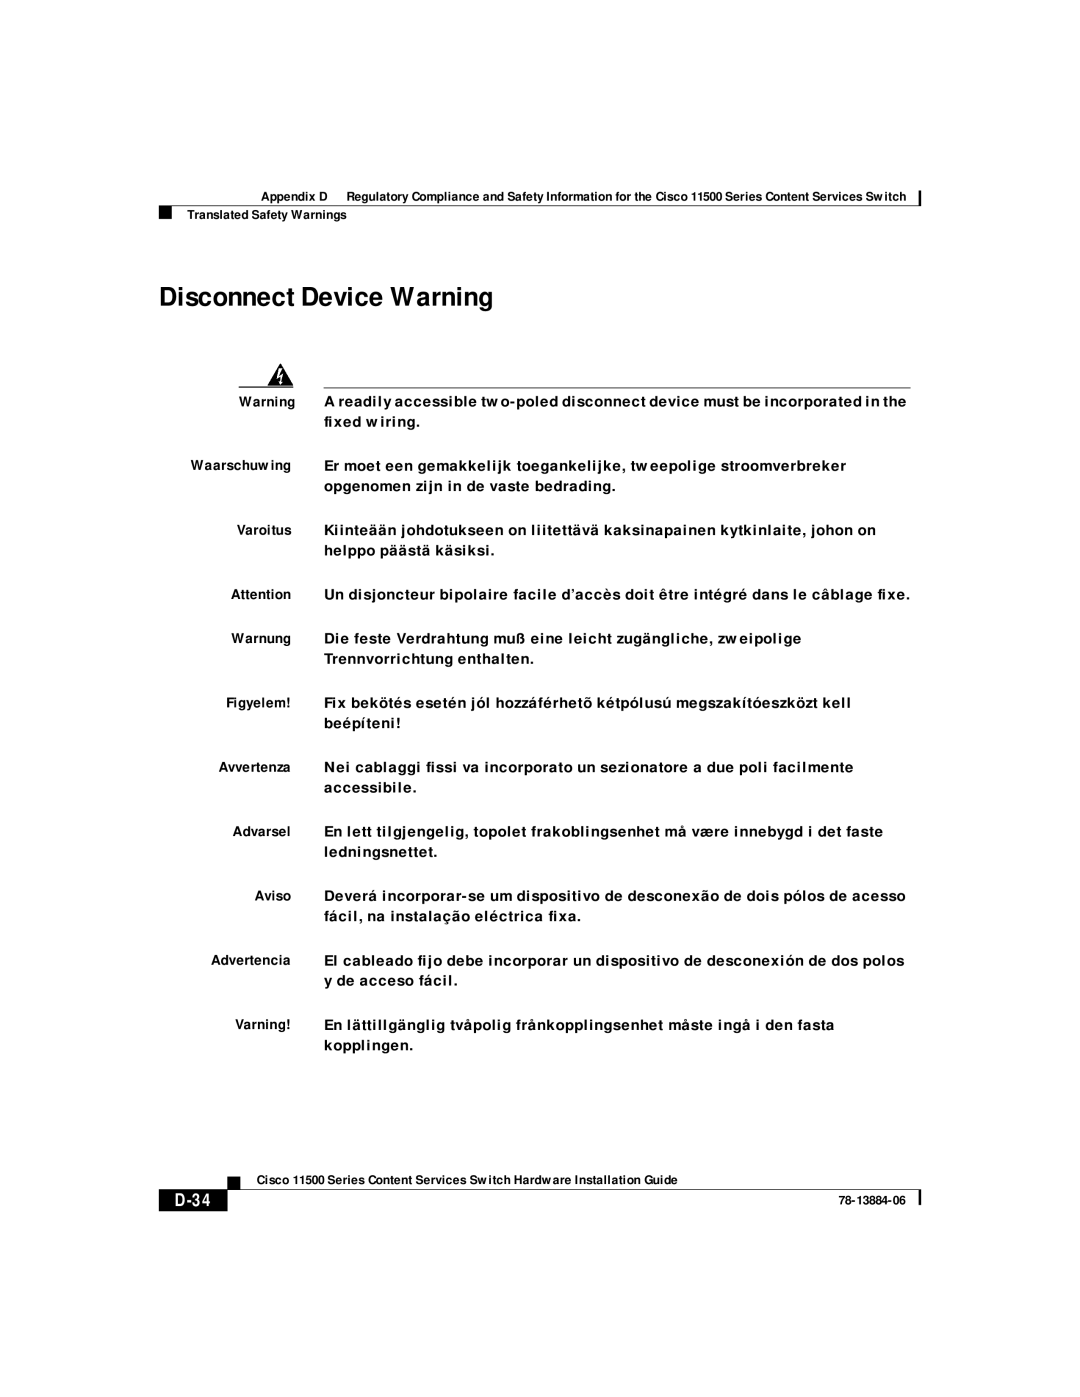 Cisco Systems 11501, 11506, 11503, 11500 appendix Disconnect Device Warning, D-34 